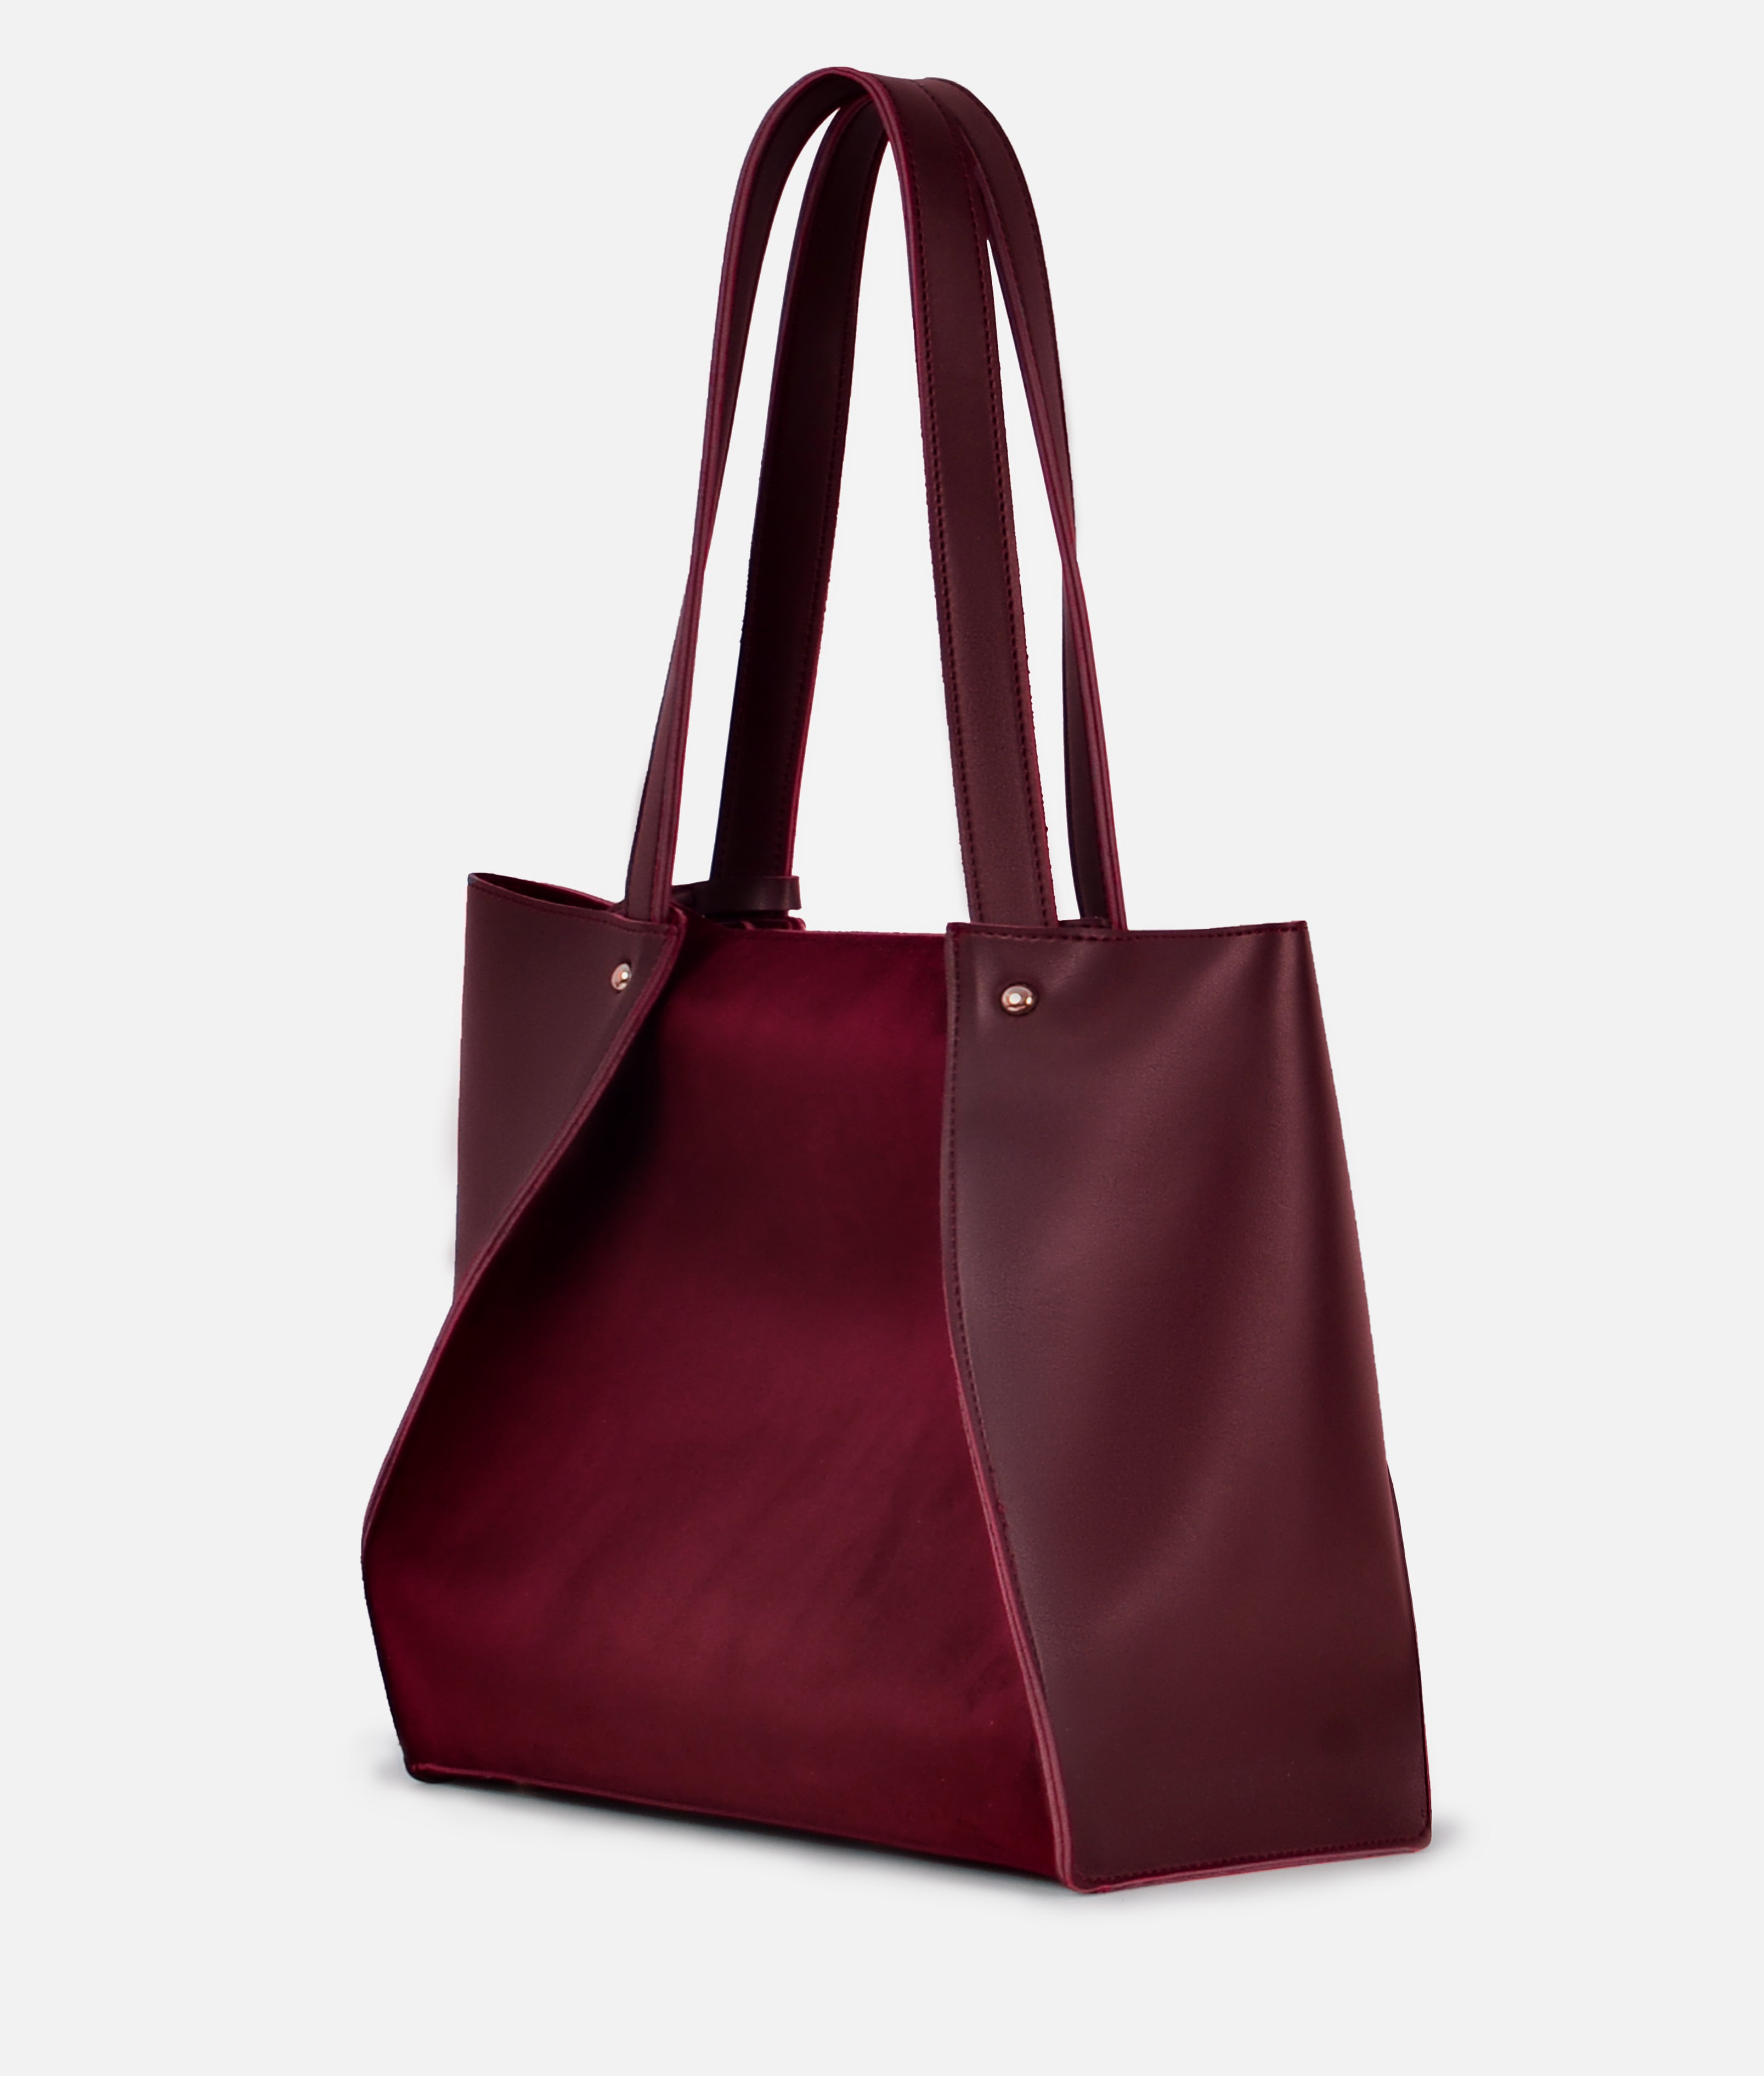 Burgundy suede shopping tote bag